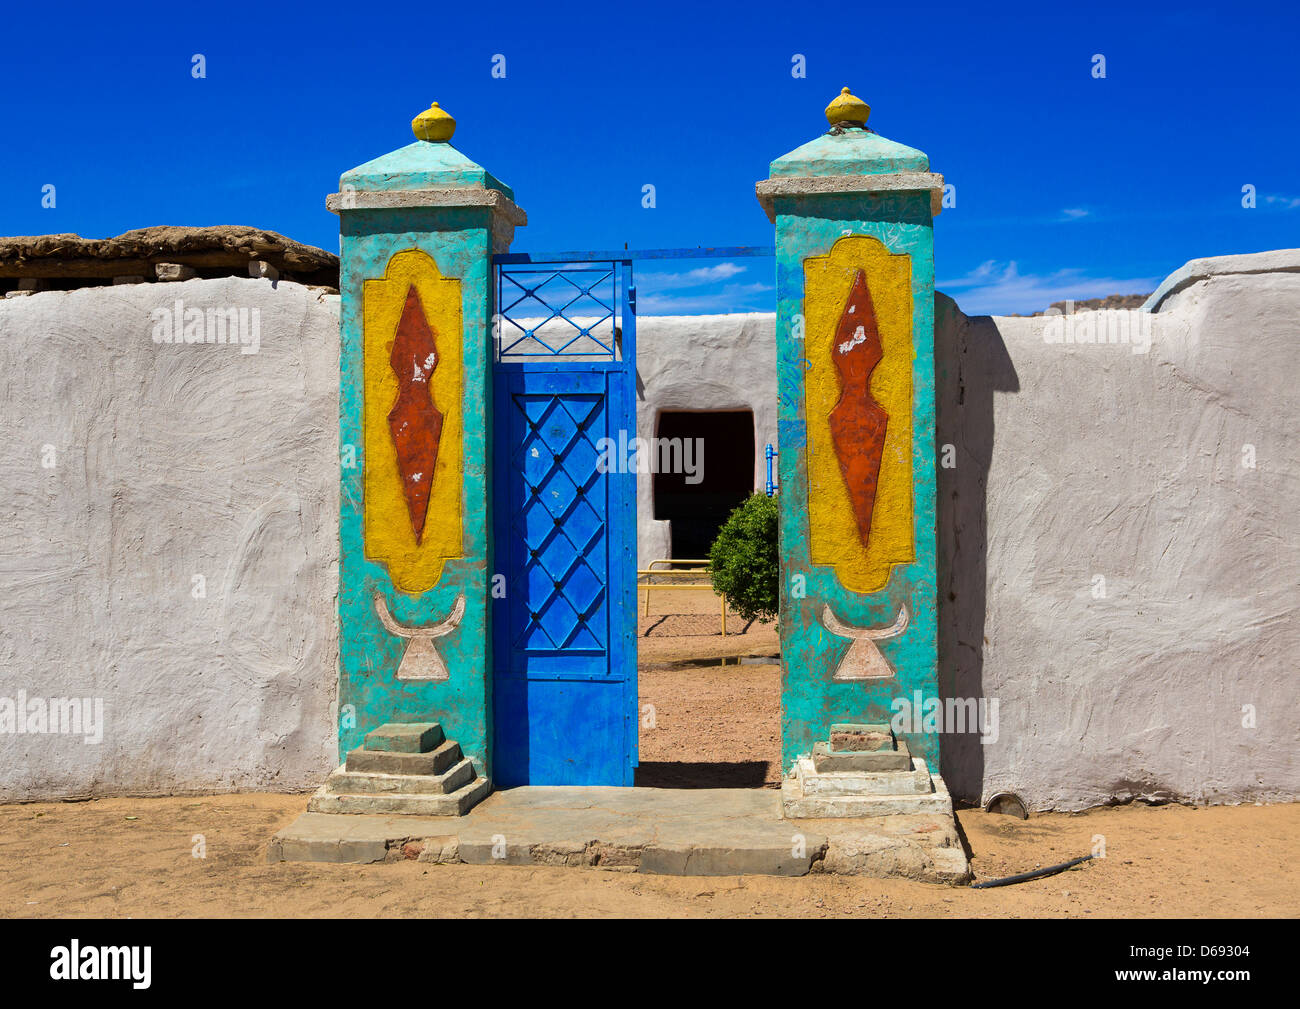 Traditional Nubian Architecture Of A Doorway, Gunfal, Sudan Stock Photo